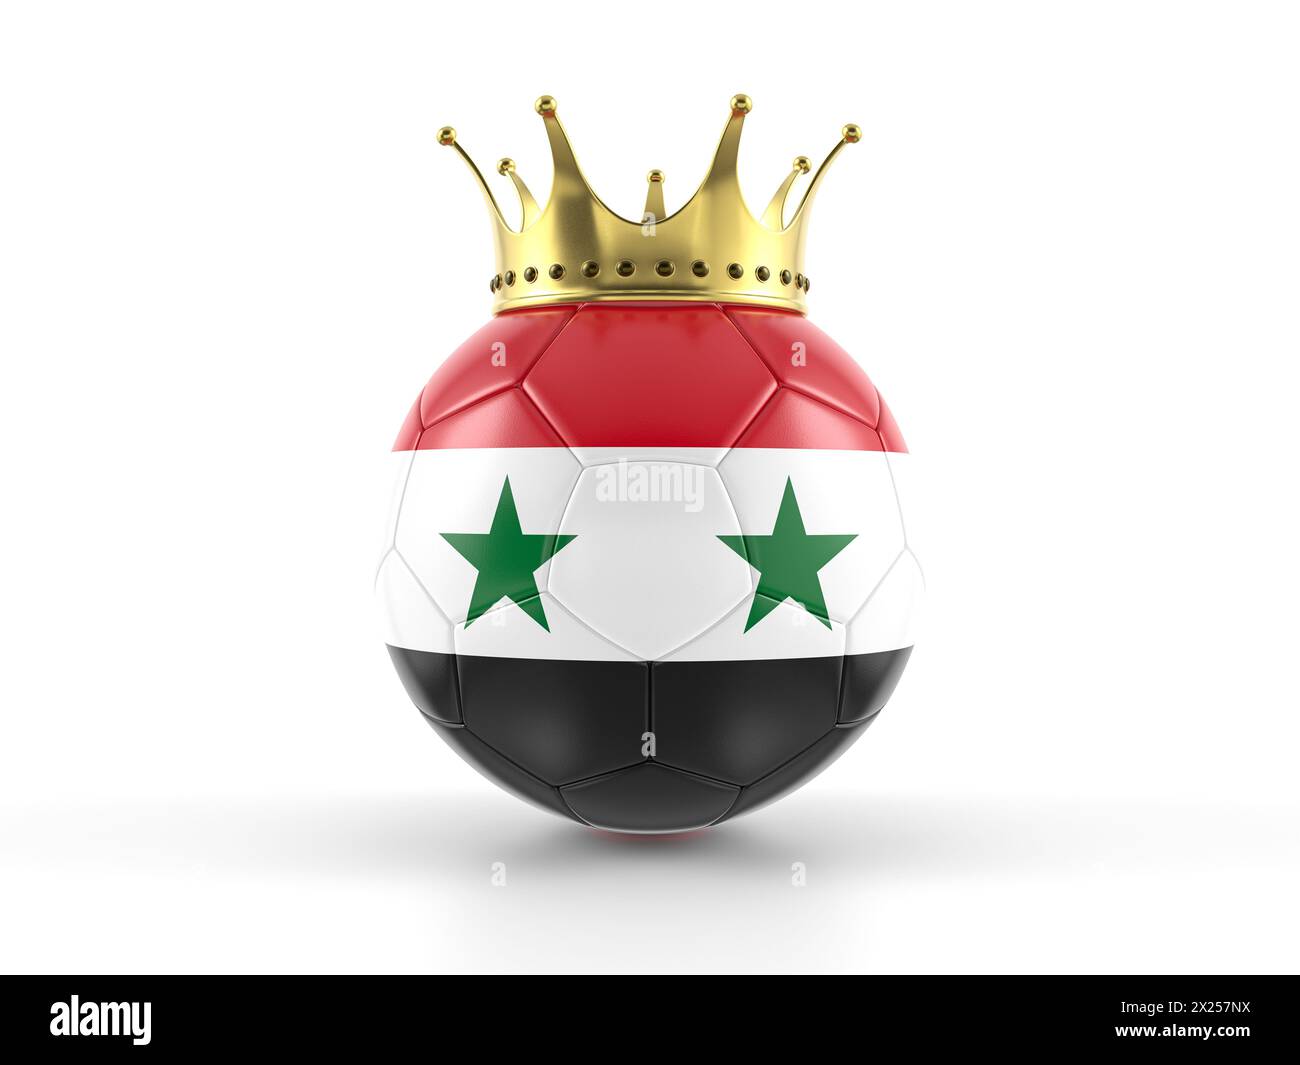 Syria flag soccer ball with crown on a white background. 3d illustration. Stock Photo